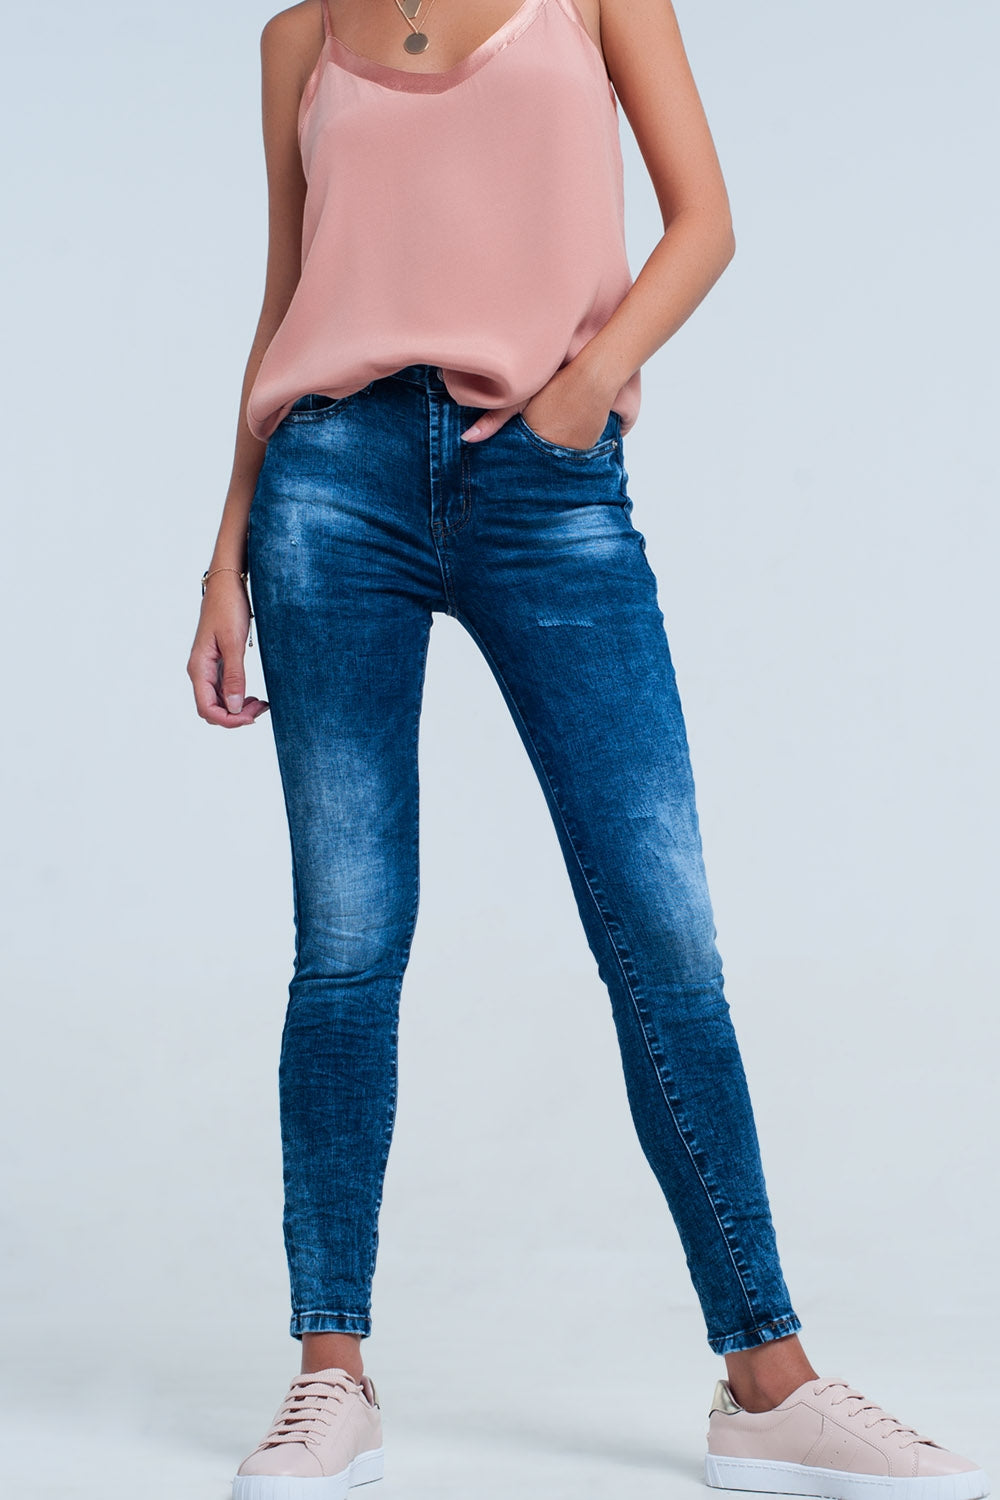 High Waist Skinny Jeans in Bright Blue Wash